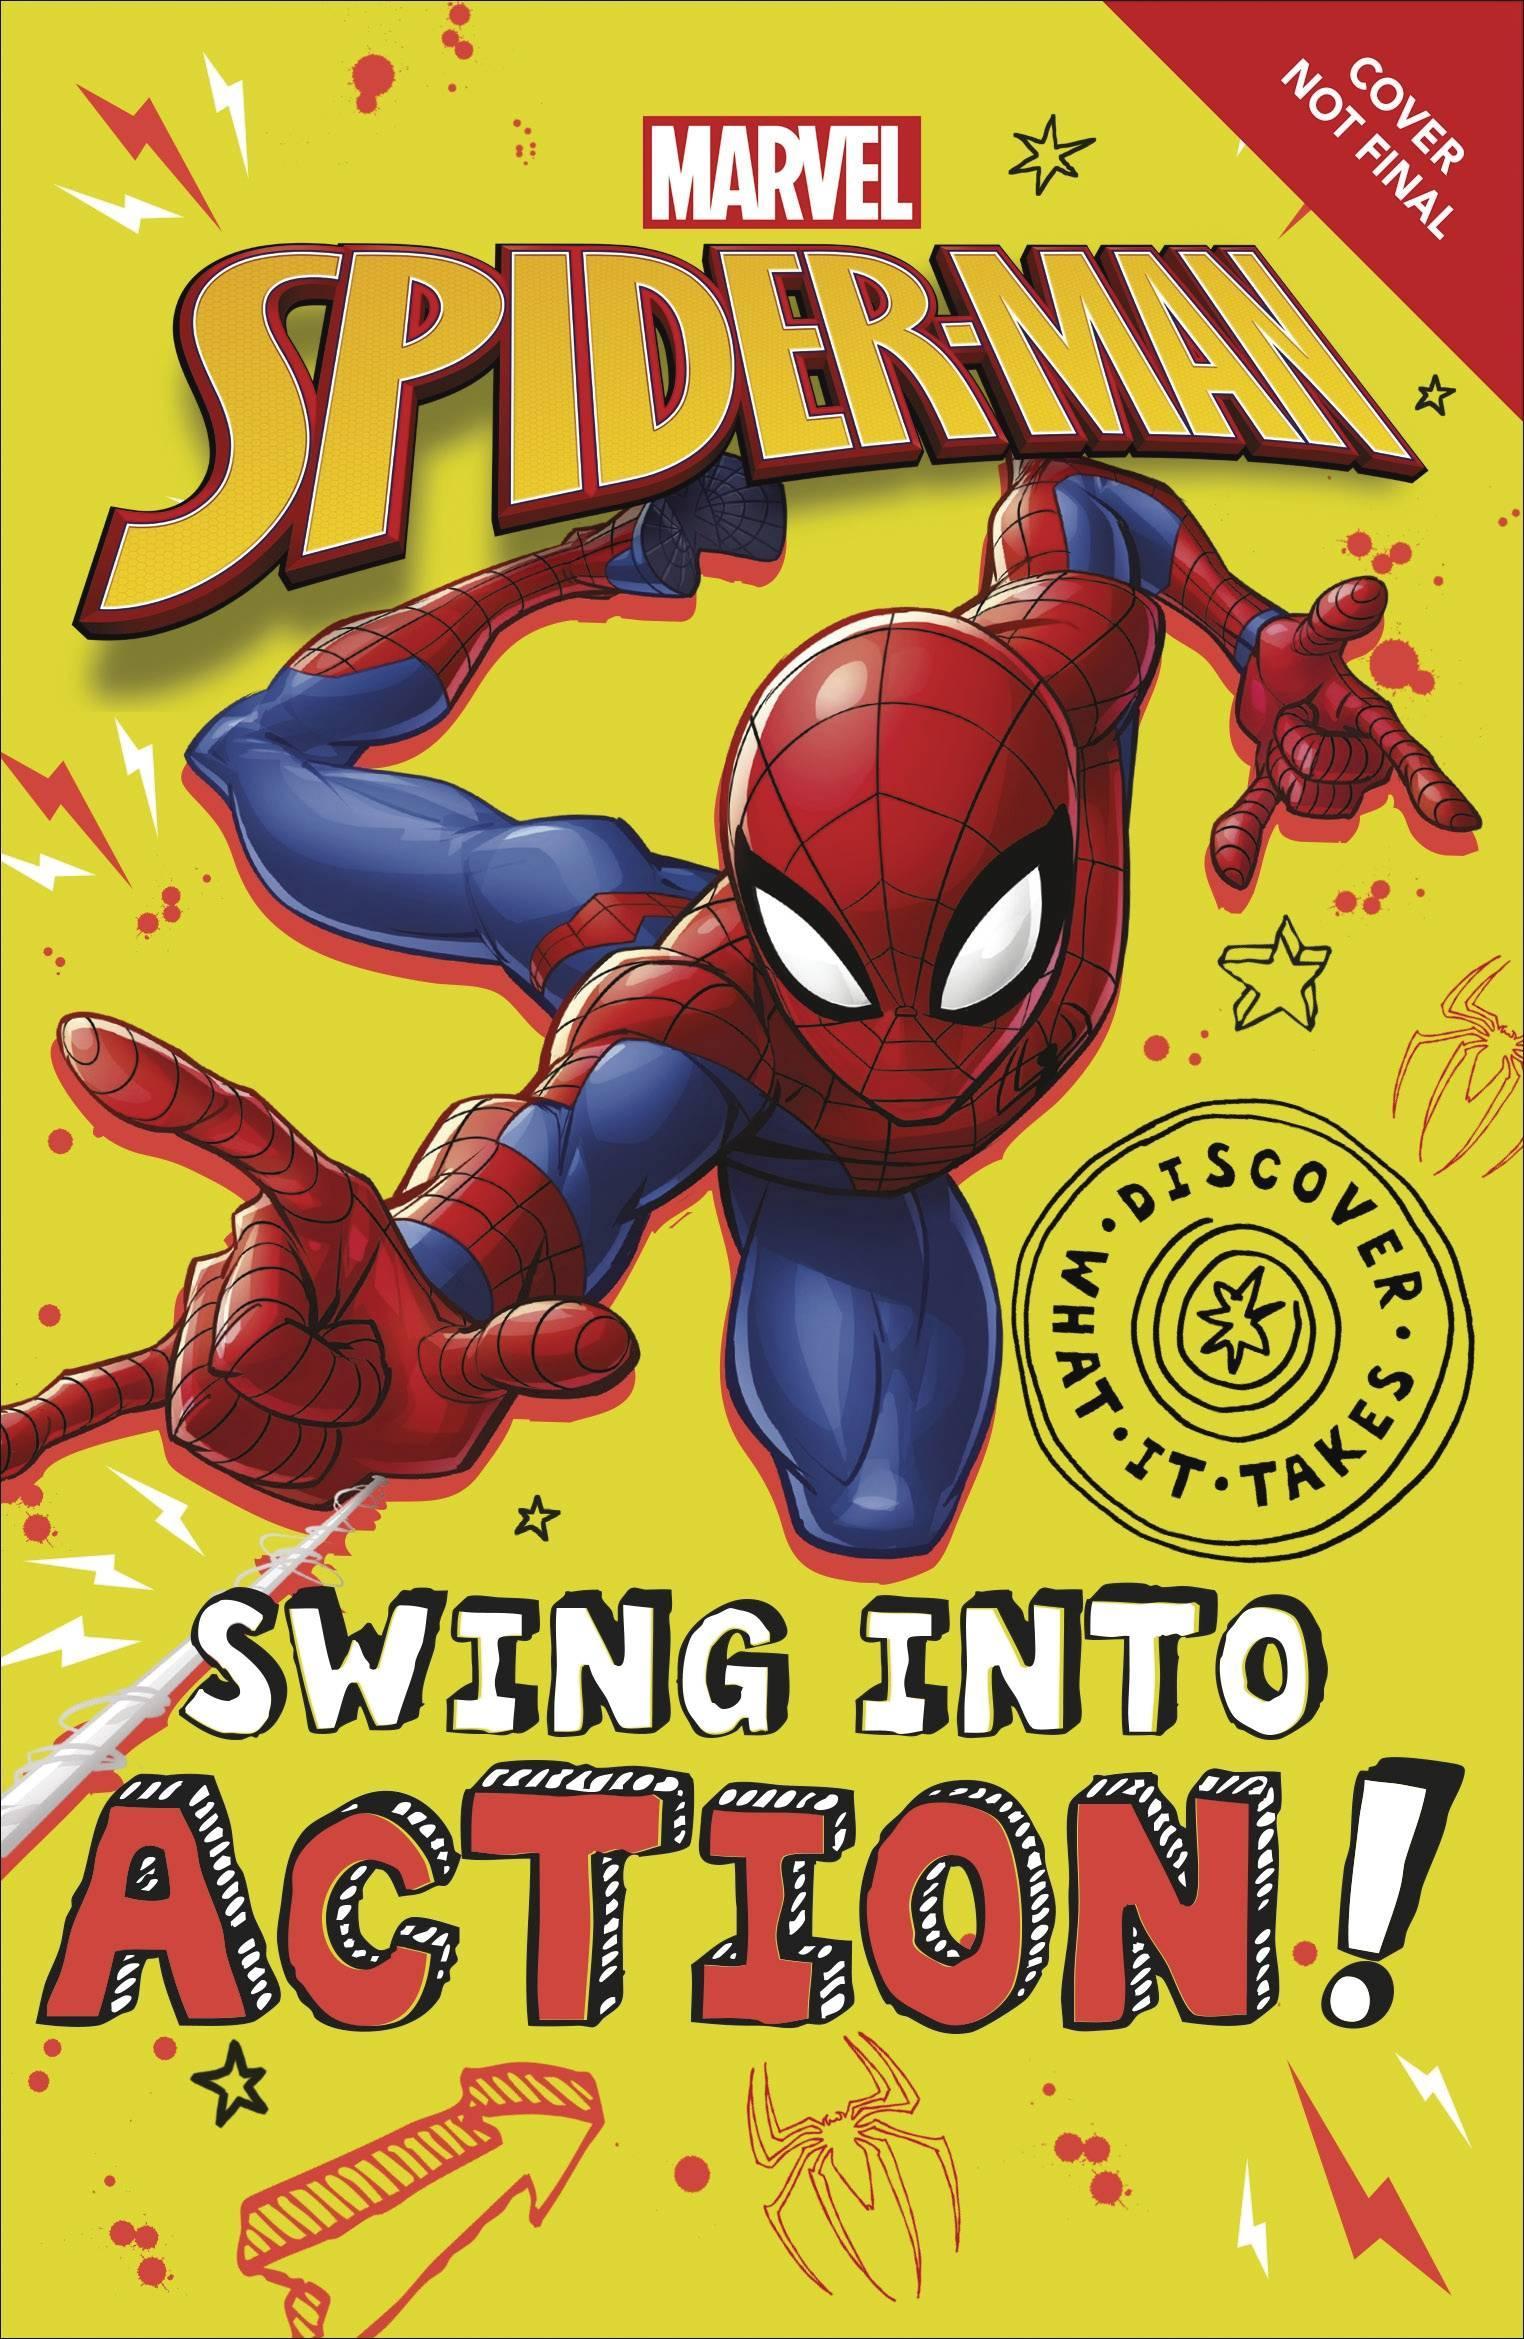 MARVEL SPIDER-MAN SWING INTO ACTION SC - Kings Comics